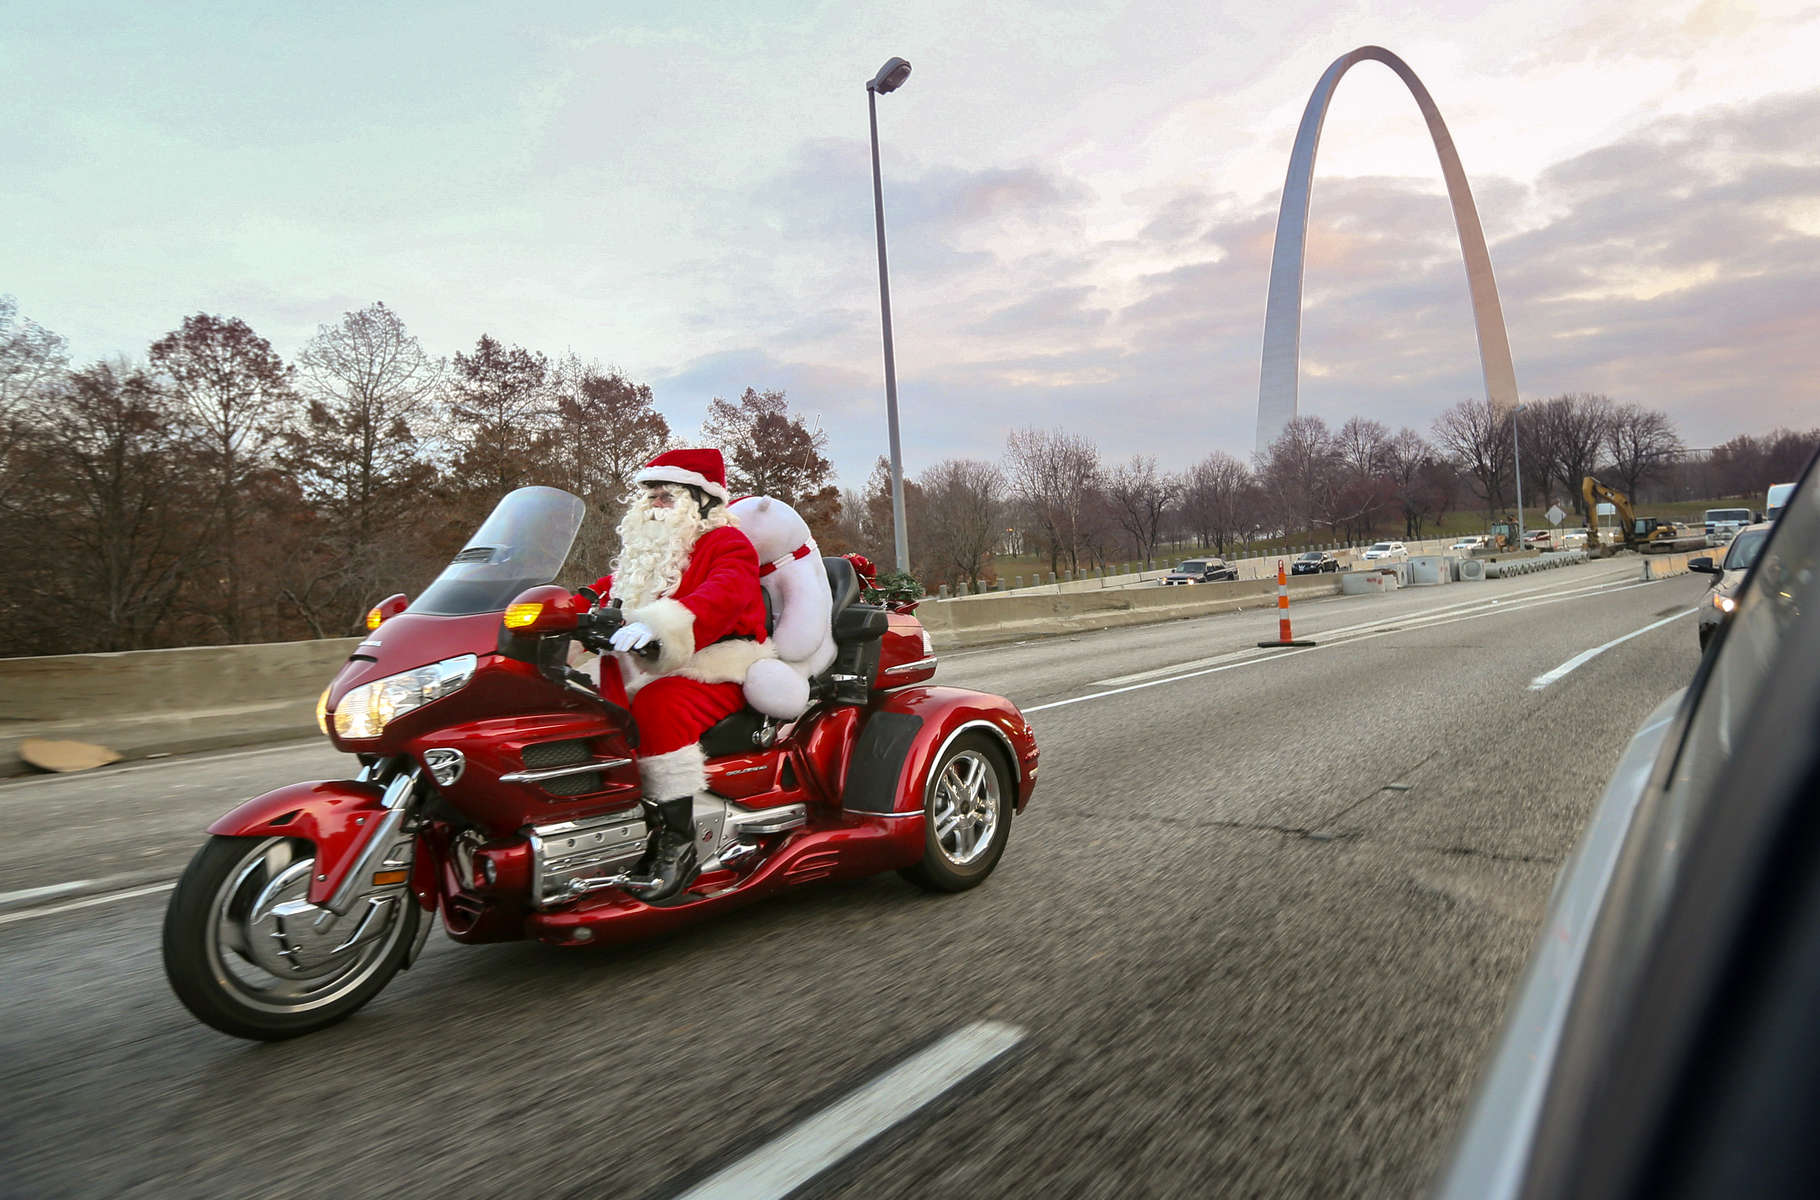 Danny Wall, from Fenton, cruises down Interstate 70 West through downtown St. Louis on his way to deliver a present to a three-year-old boy in Granite City on Tuesday, Dec. 3, 2013.  {quote}I love seeing the expression of joy on people's faces as I drive by{quote} said Wall who started playing the role of Santa Claus eight years ago when his first grandchildren were born.  At first he visited just the homes of friends and family but he has visited with groups Boy Scouts, Girl Scouts, and children at Rankin Jordan.  He says playing Santa Claus helps him get the Christmas spirit and relieve stress.  Wall is a riding a 2008 Honda Goldwing Trike.Photo By David Carson, dcarson@post-dispatch.com